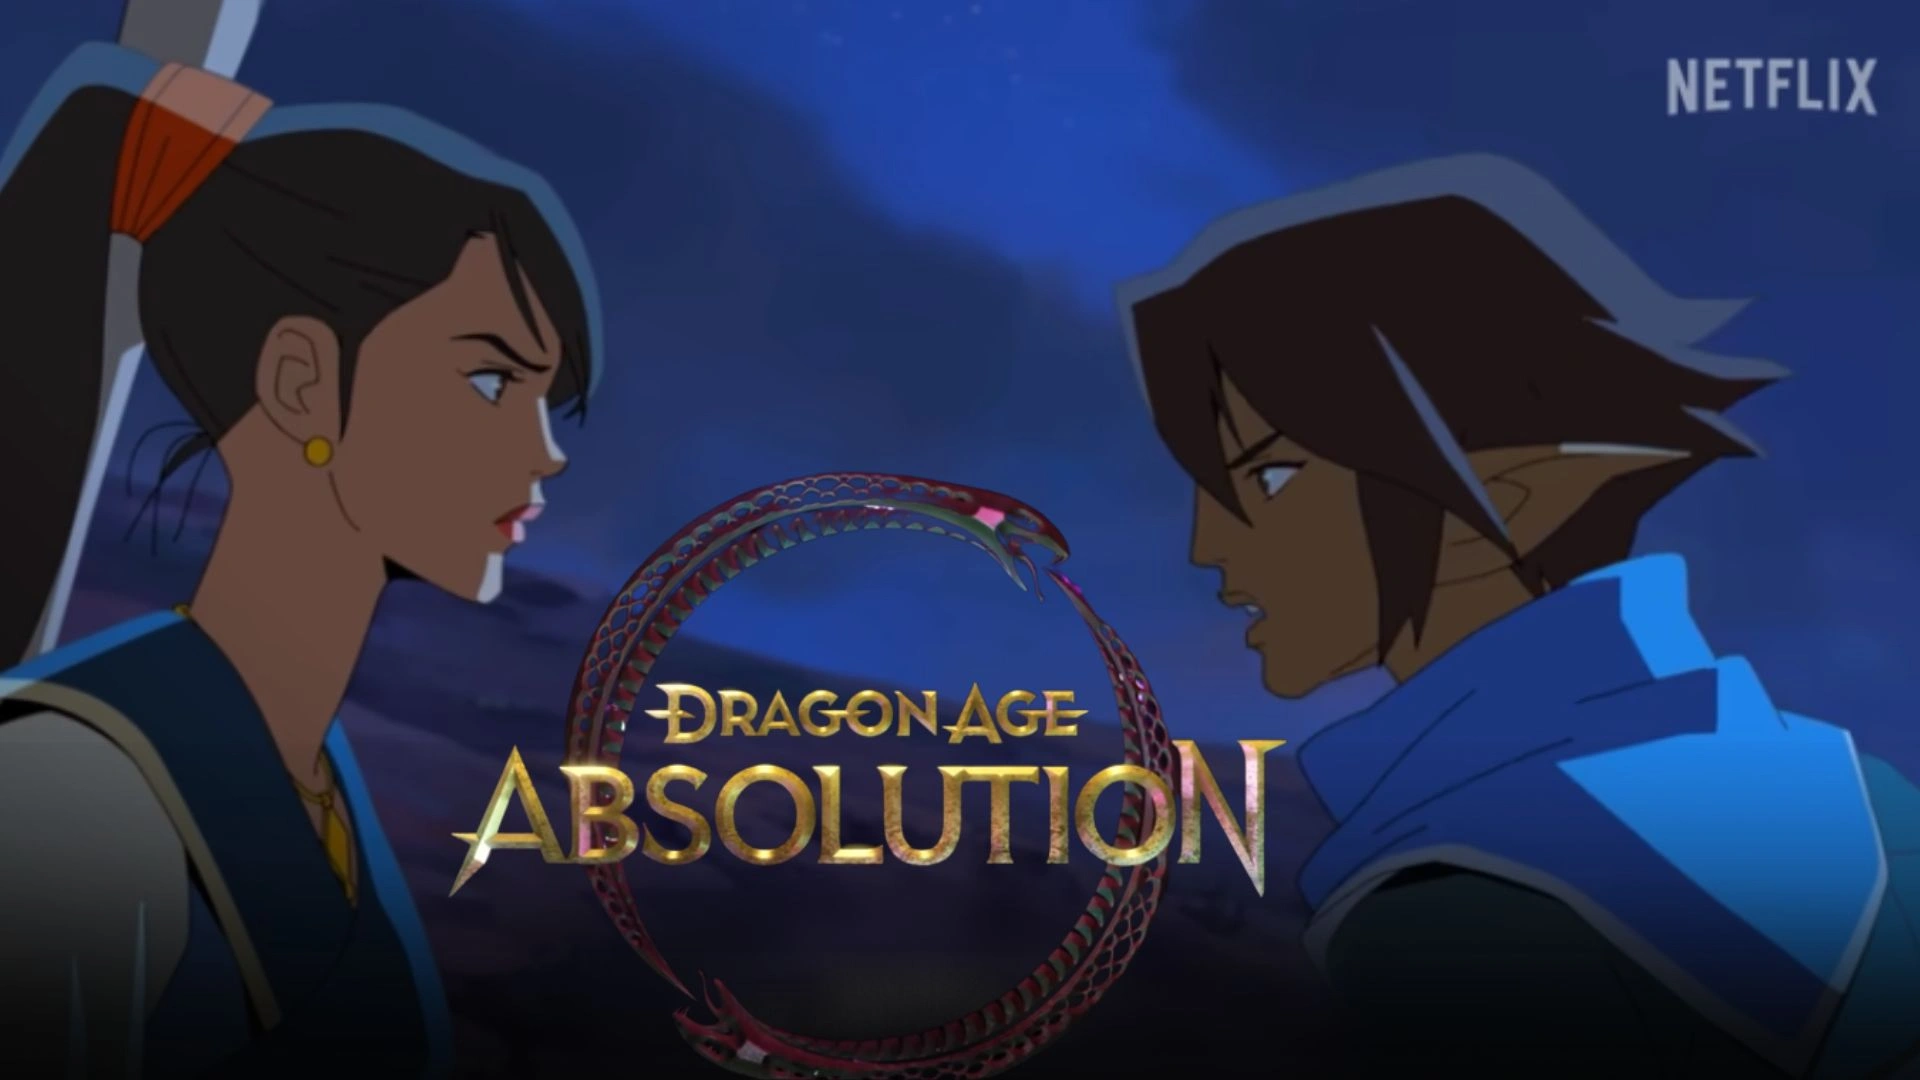 Dragon Age: Absolution Parents Guide and Age Rating (2022)